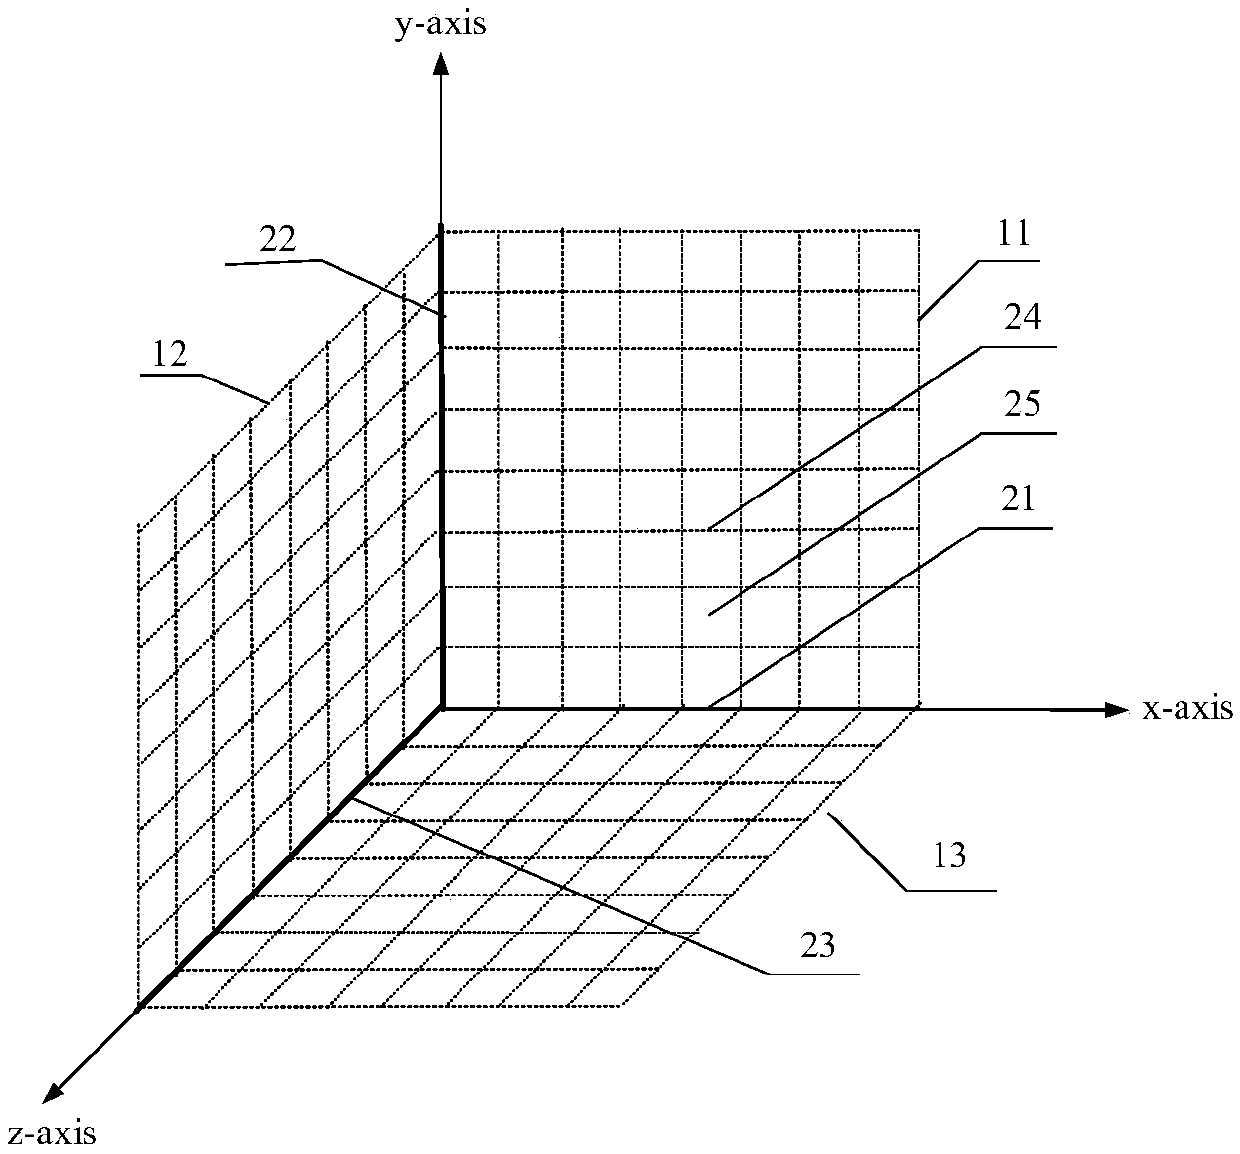 A calibration template and a method for rapidly calibrating external parameters of a camera